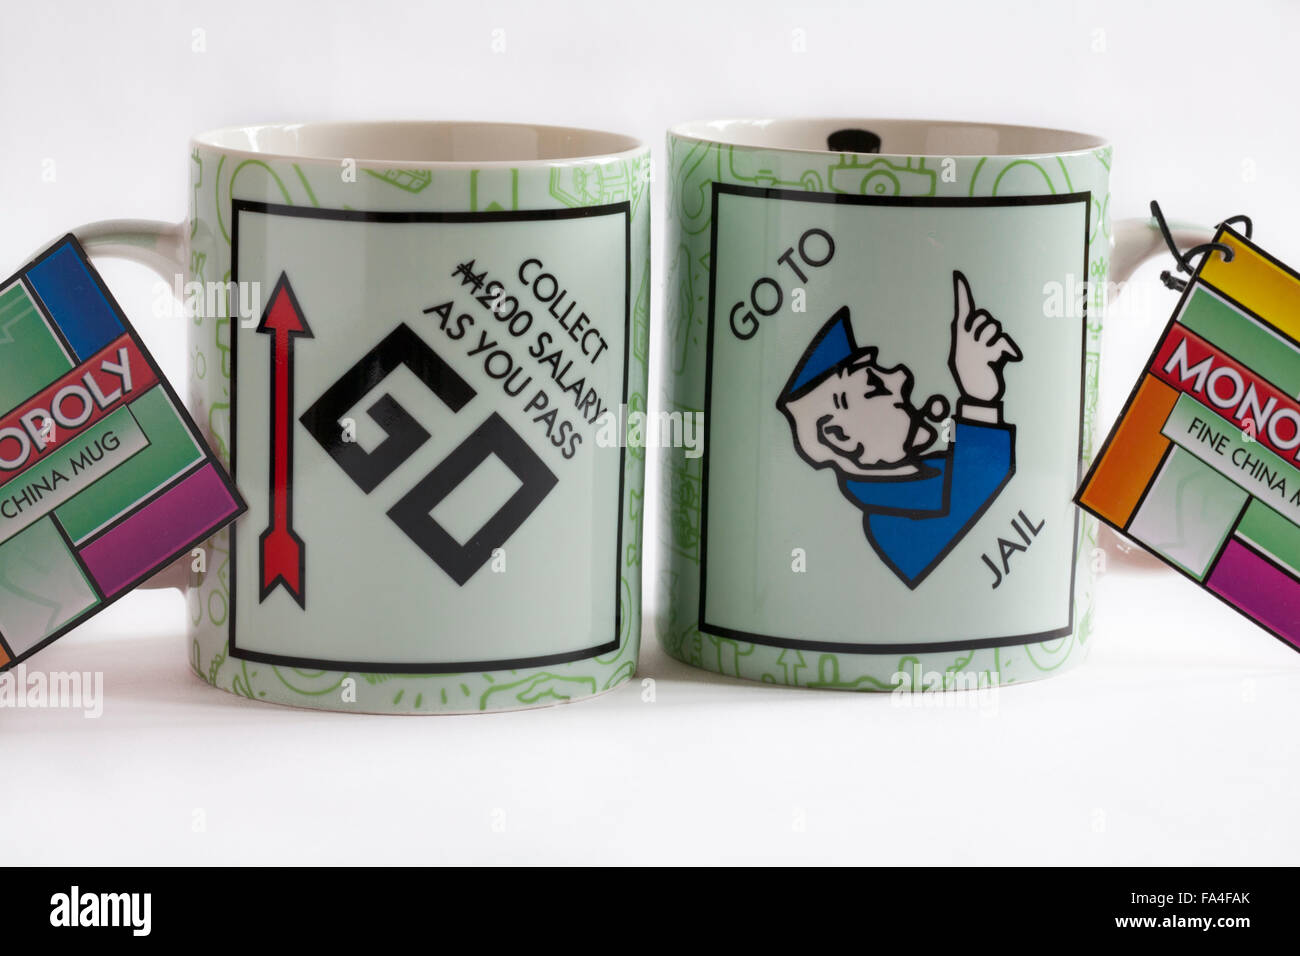 Monopoly fine china mugs with label tag - Go to jail and collect 200 salary as you pass go set on white background Stock Photo